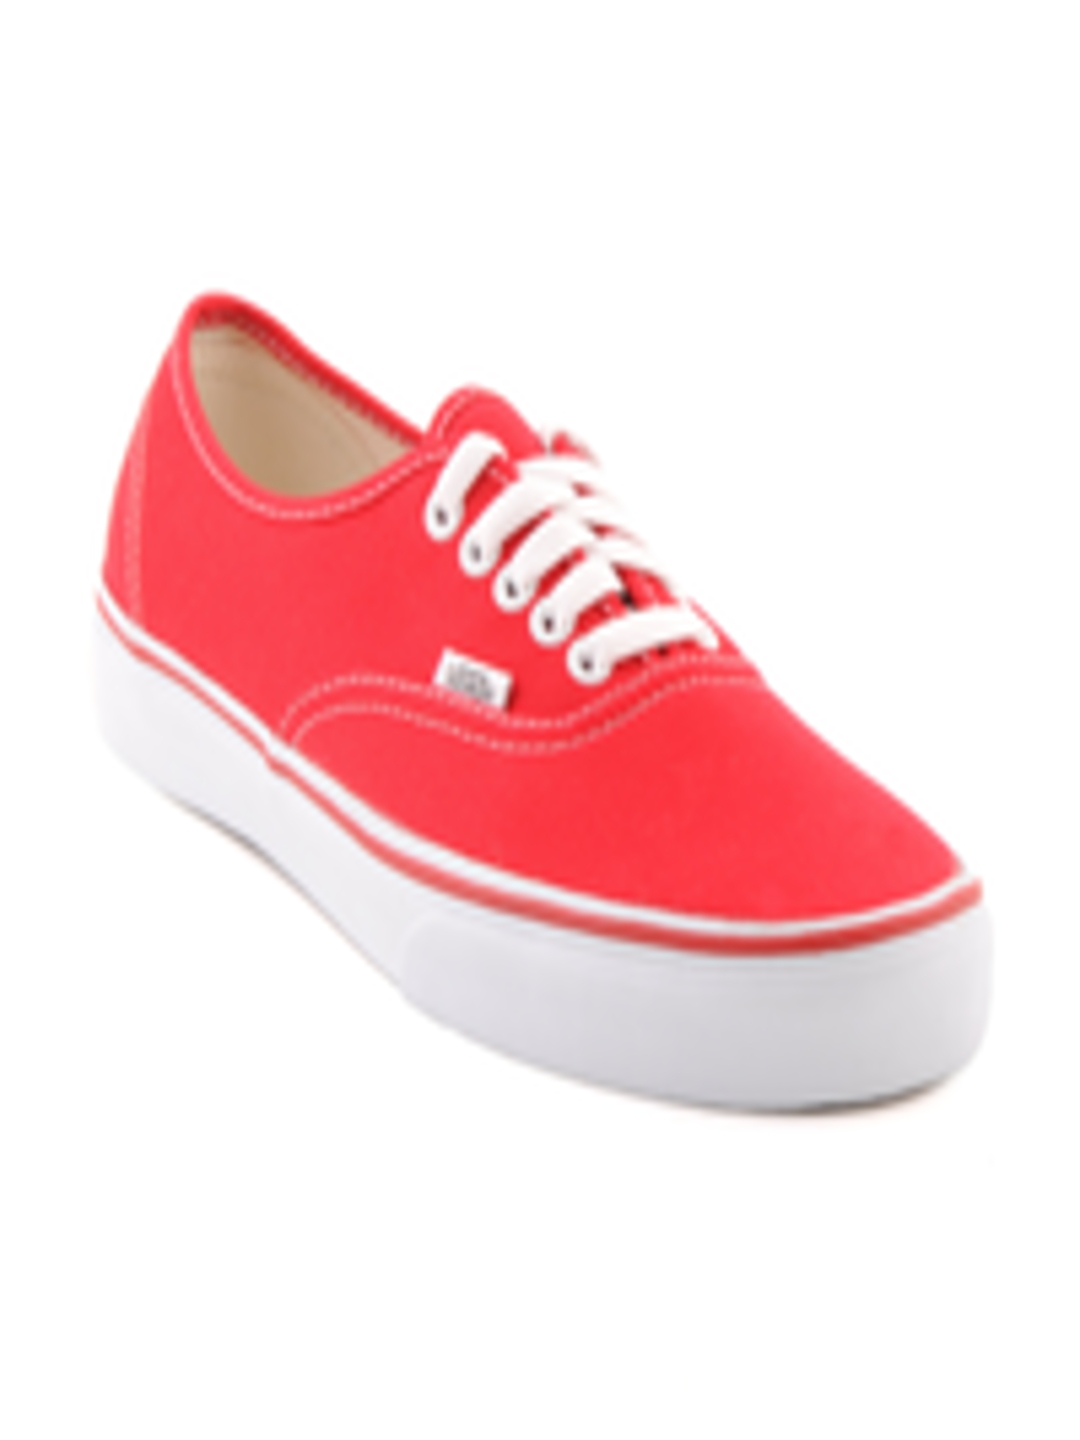 Buy Vans Unisex Authentic Red Casual Shoes - Casual Shoes for Unisex ...